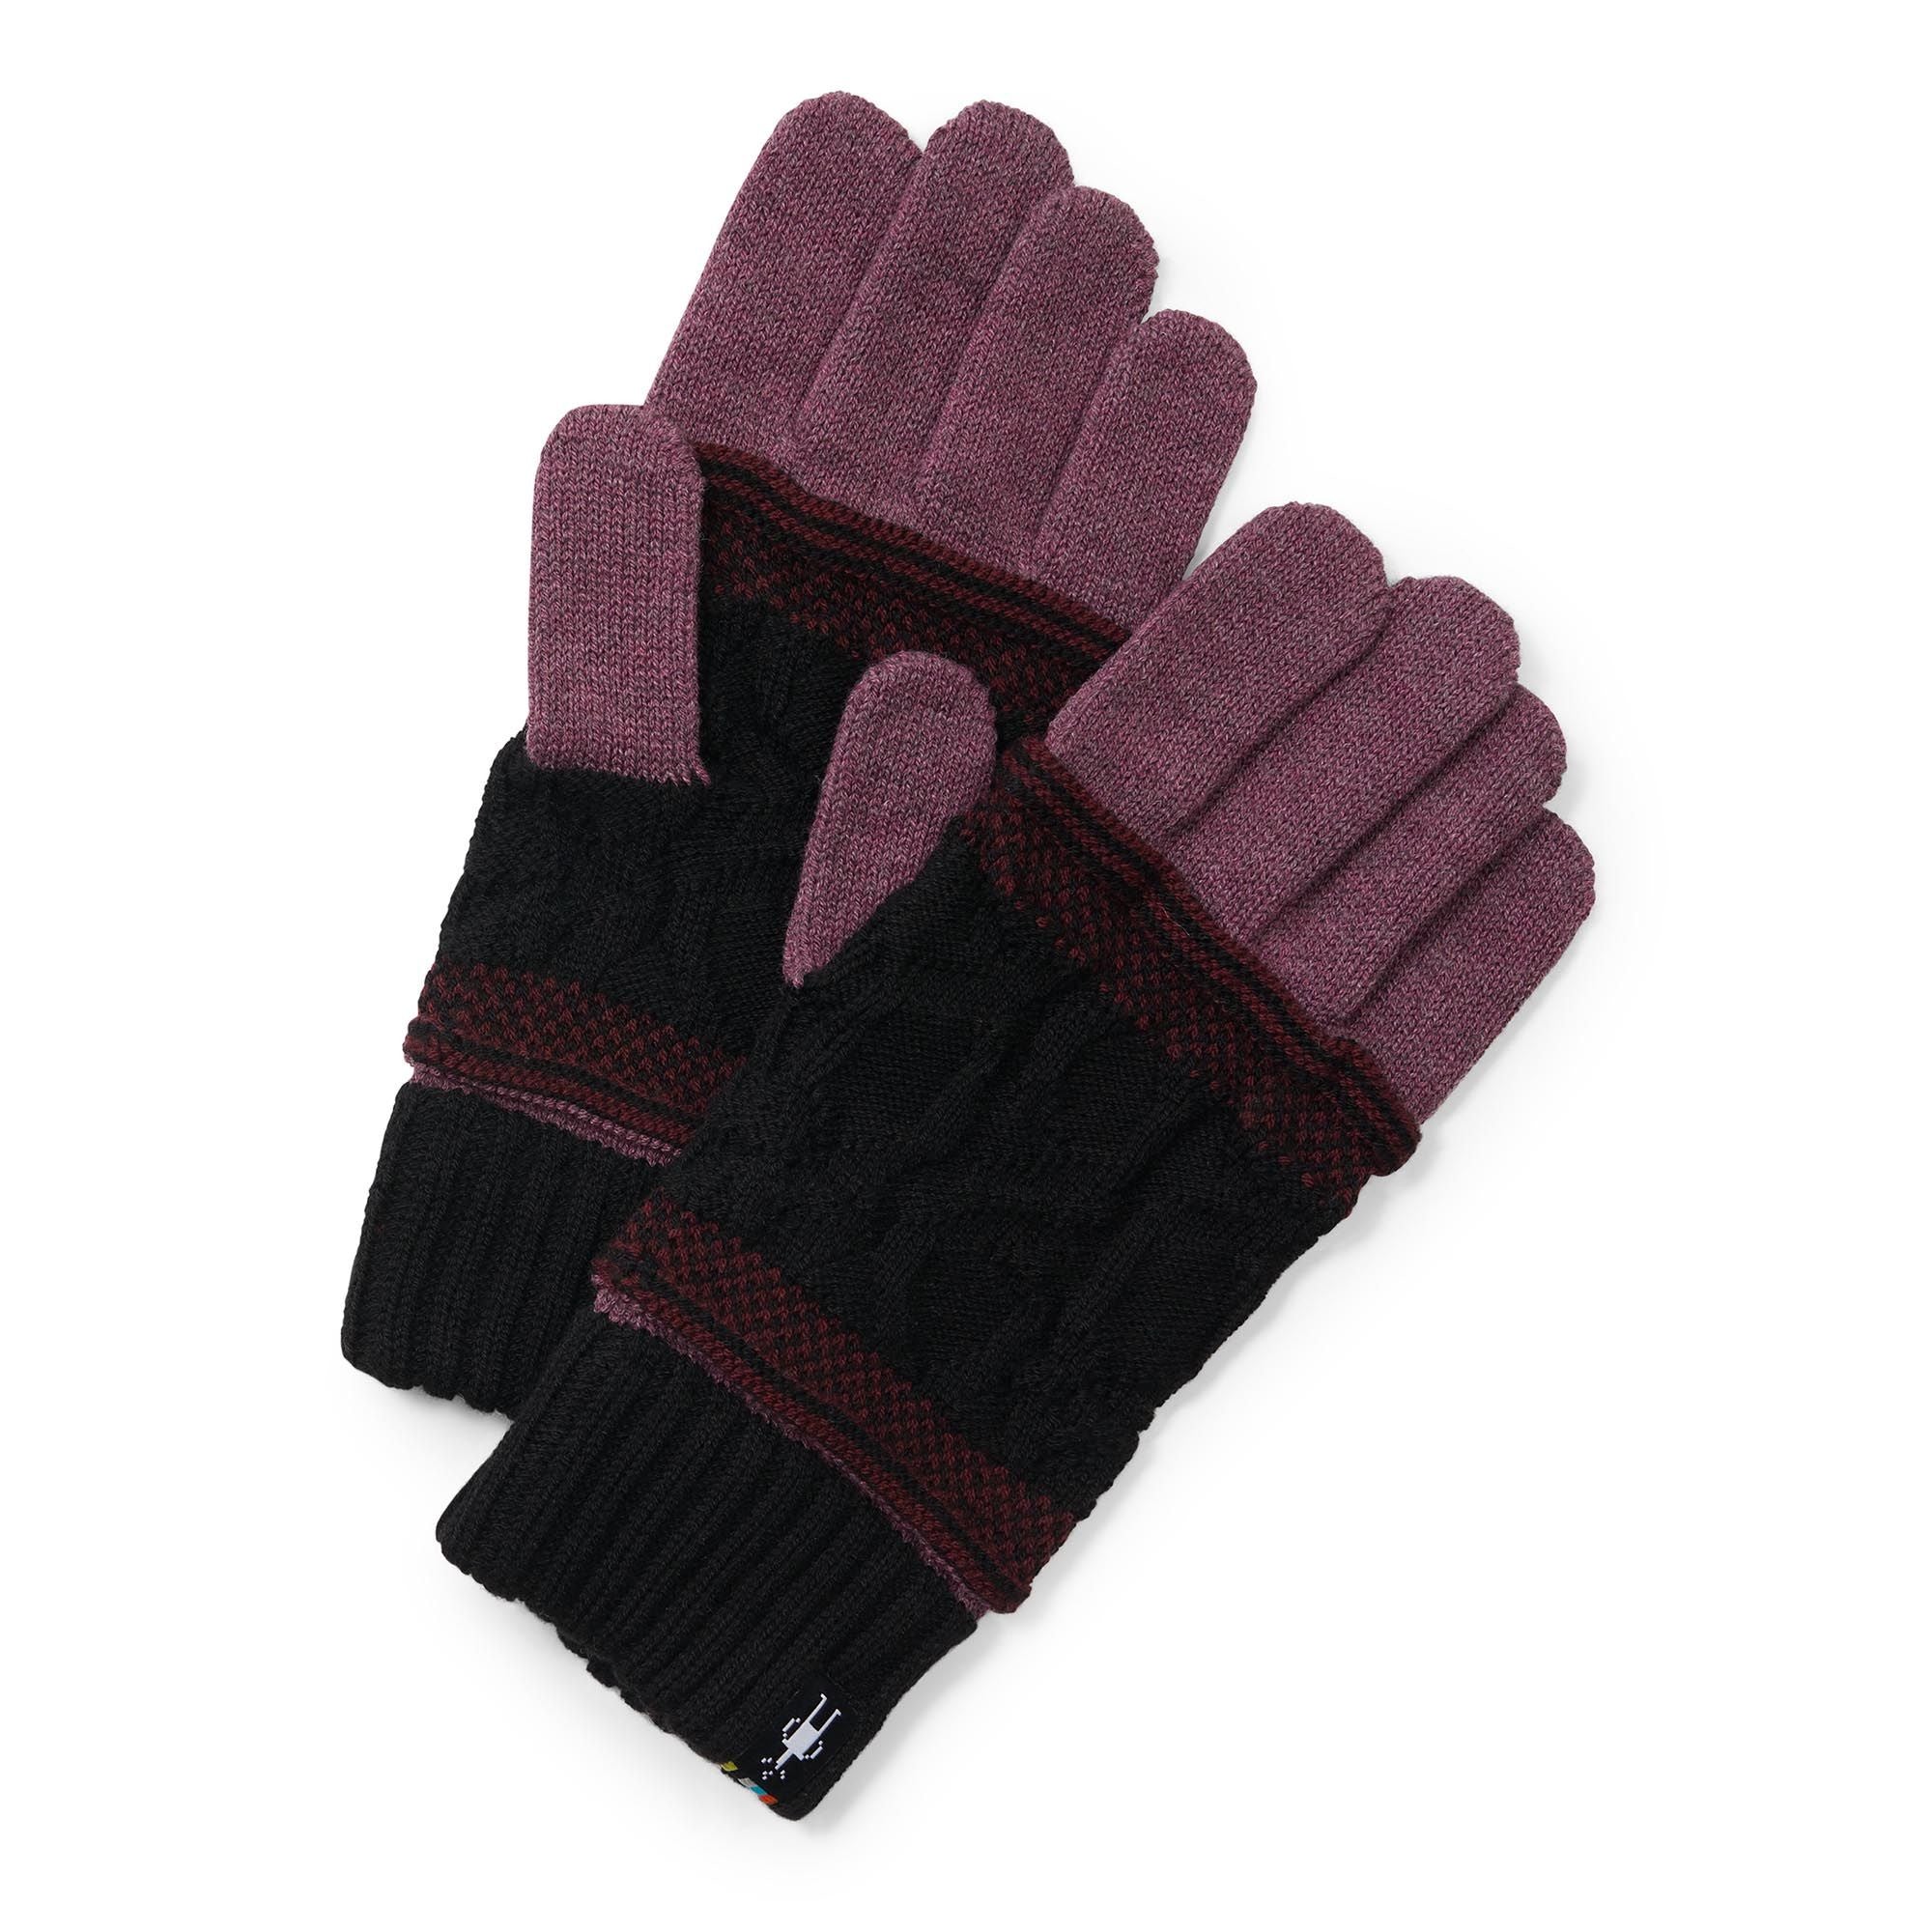 SMARTWOOL - POPCORN CABLE GLOVE IN BLACK CHERRY HEATHER